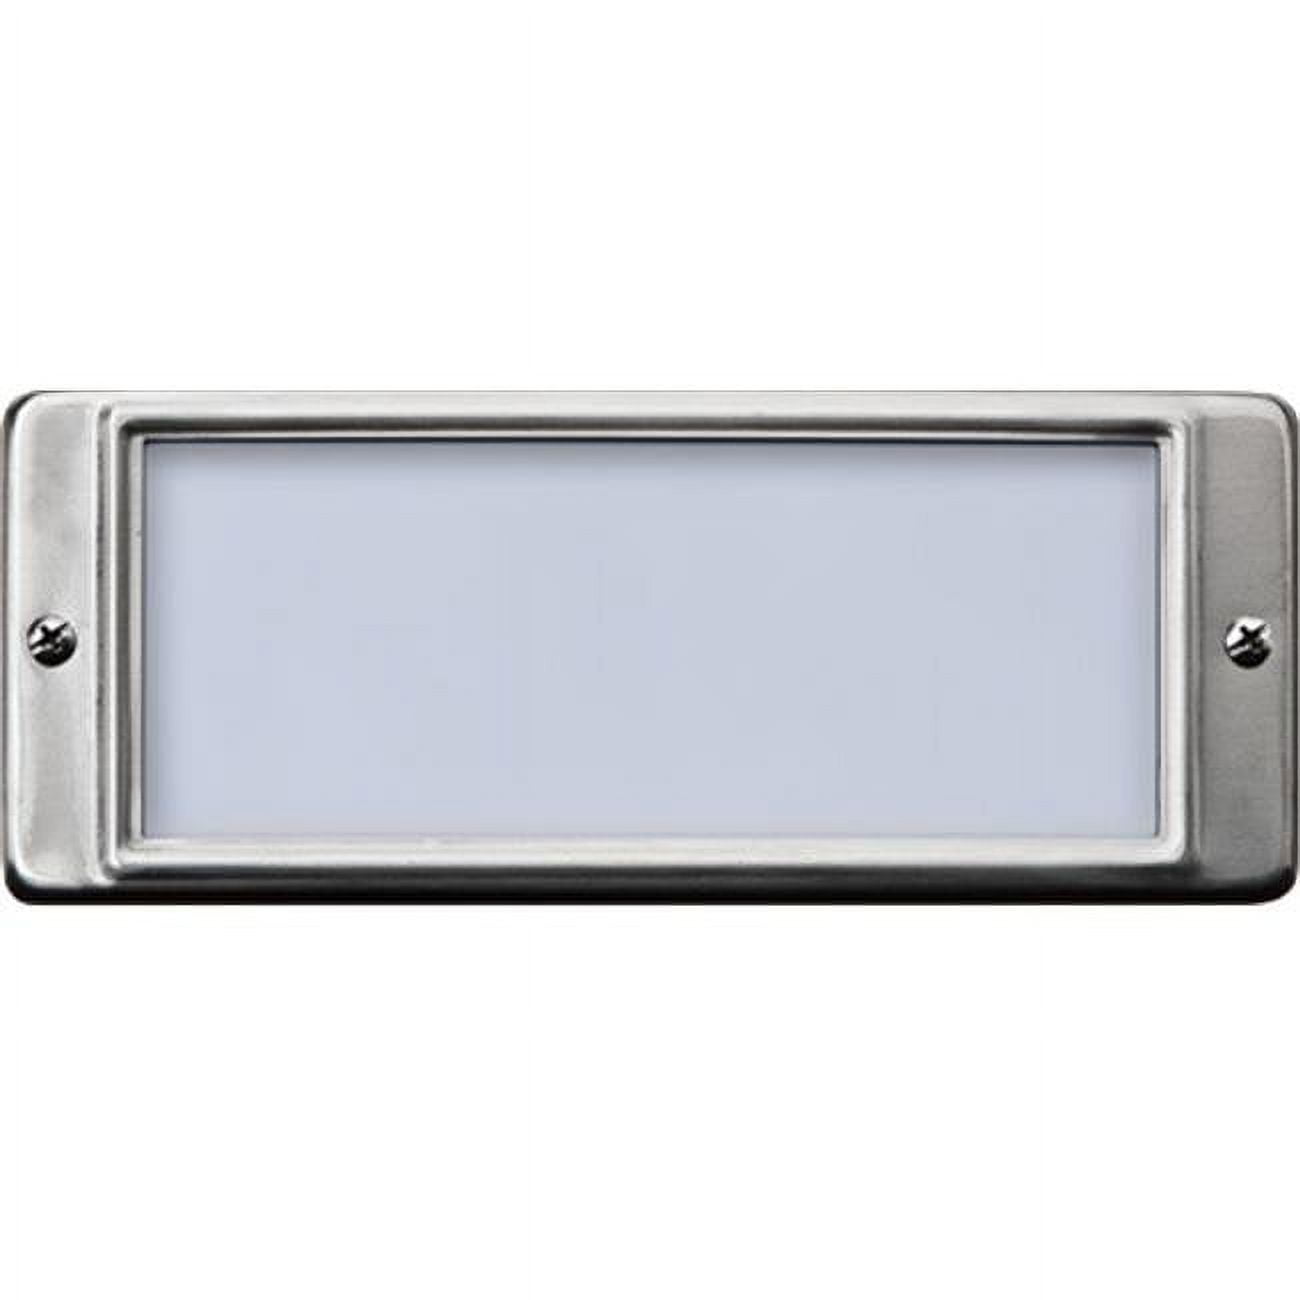 Picture of Dabmar Lighting LV602-SS304 2x 20W 12V Recessed Stainless Steel Open Face Brick Step Wall Light - JC Type Lamp, 304 Stainless Steel